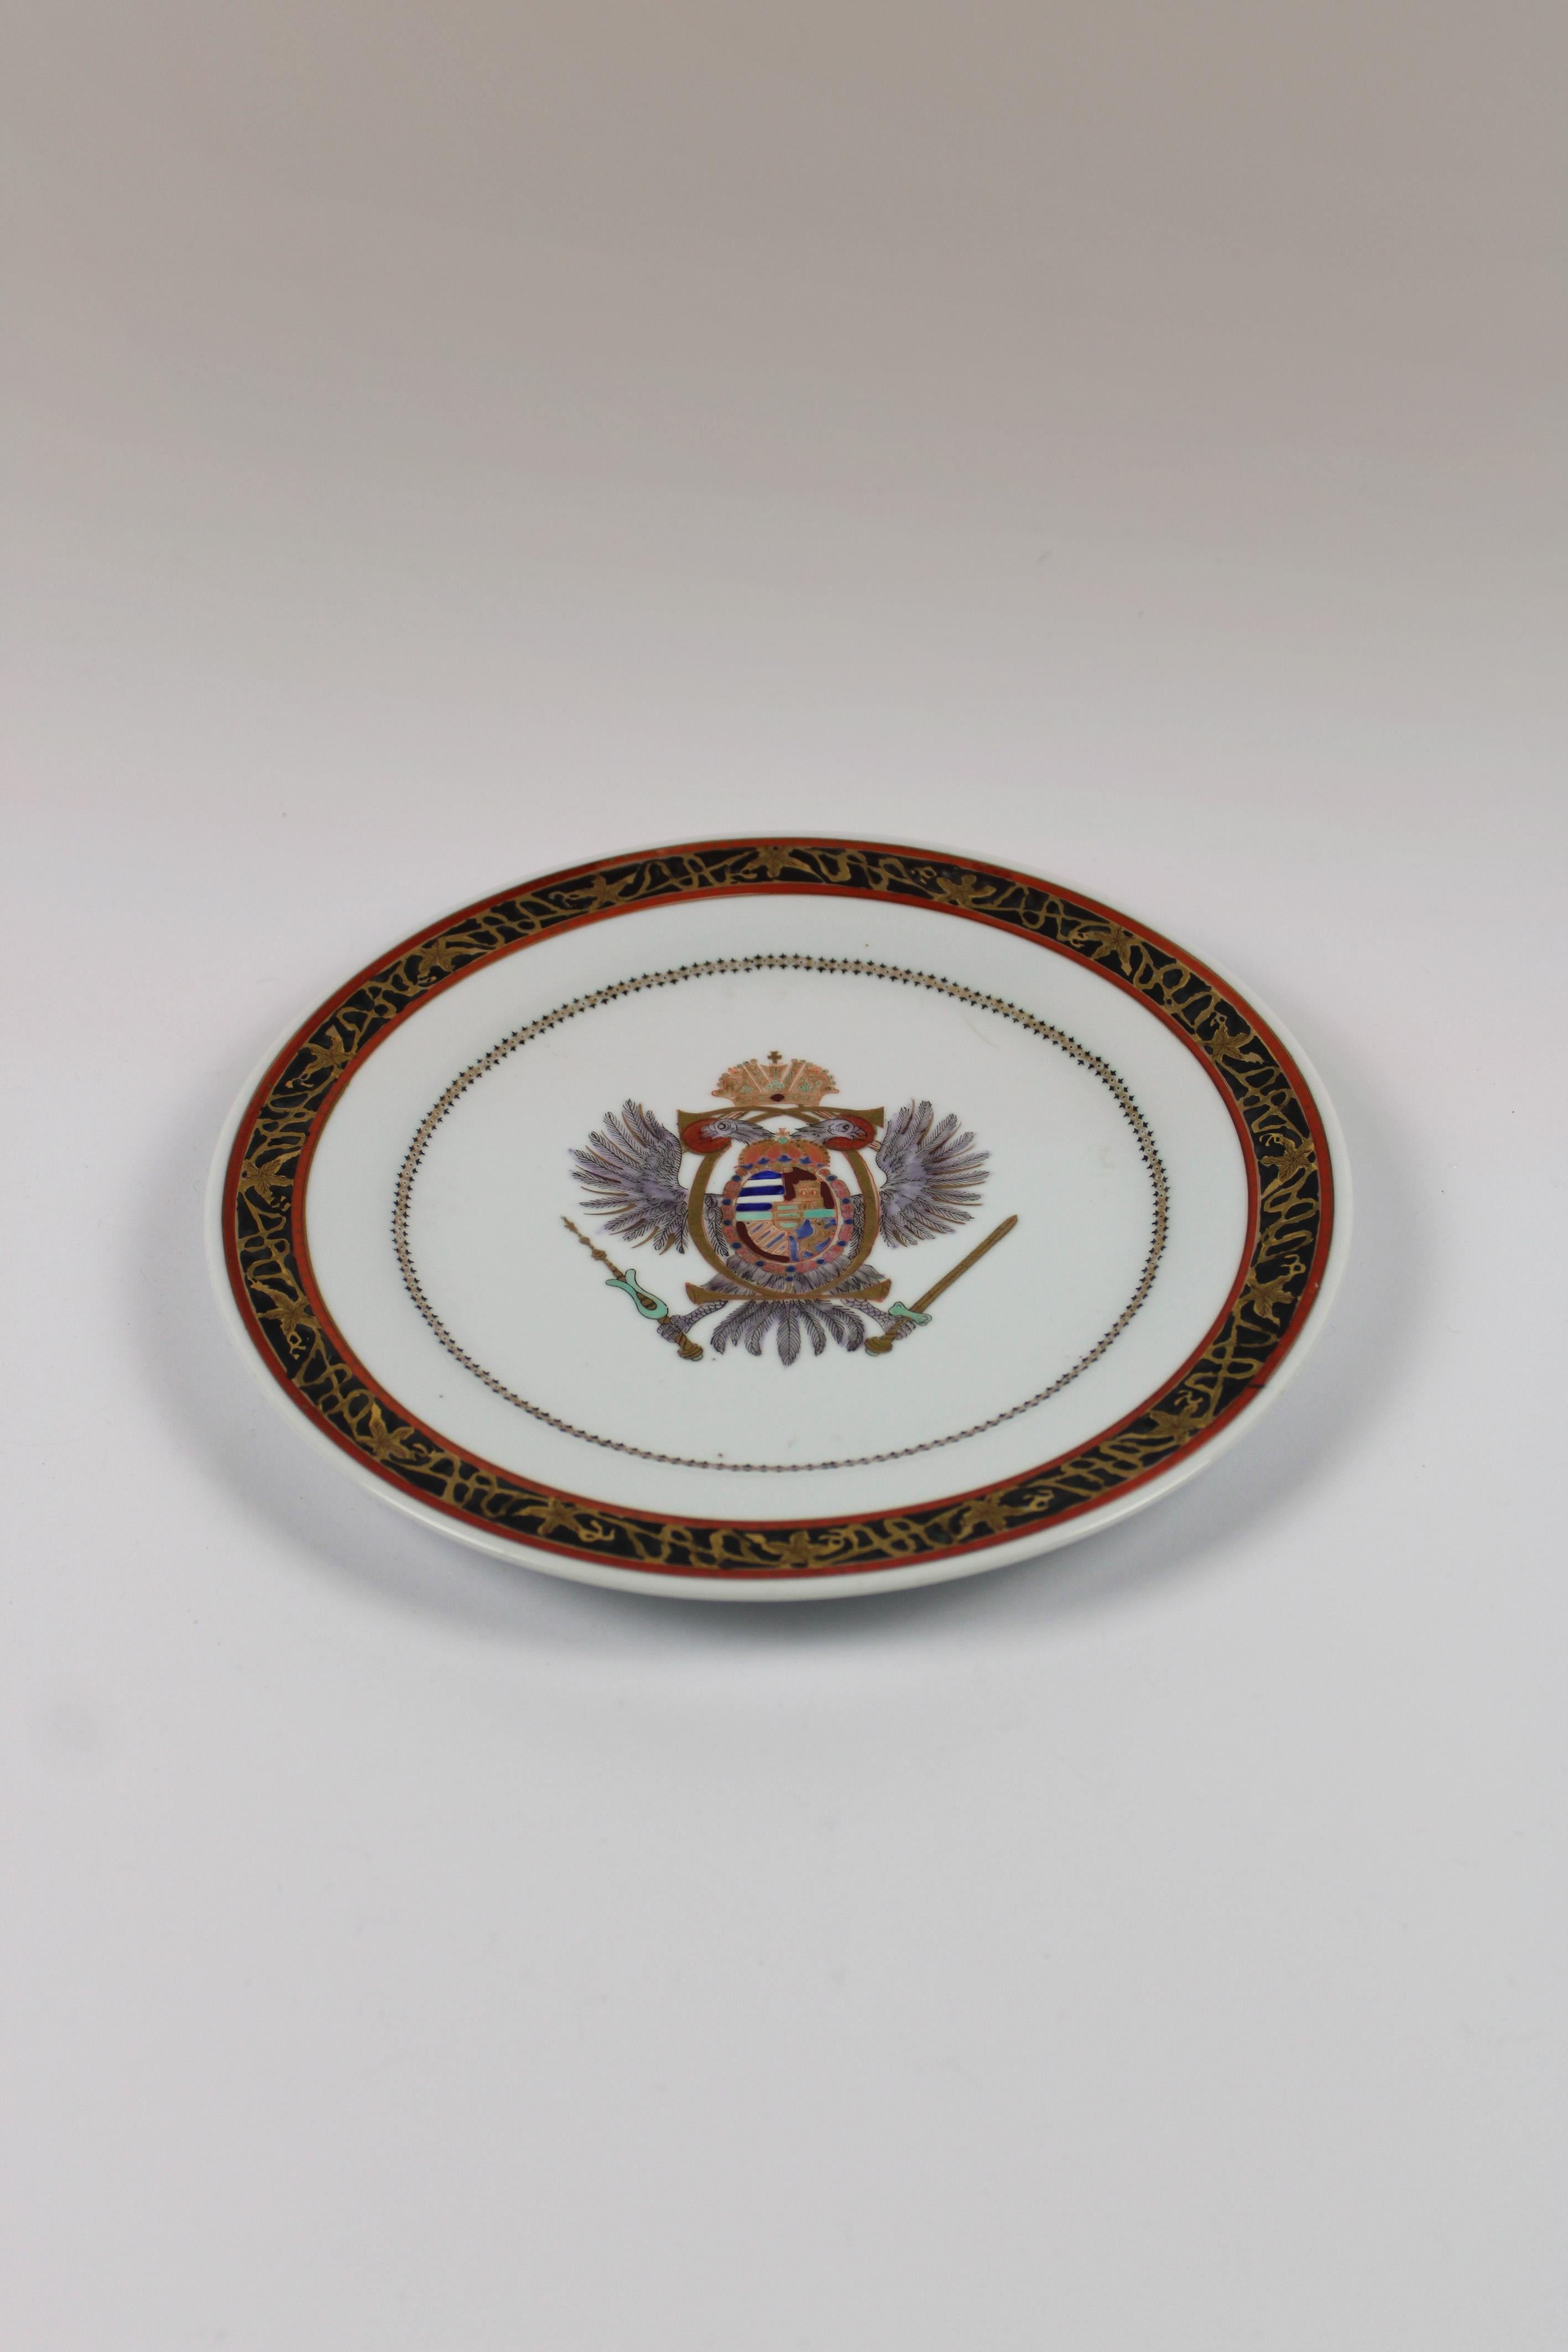 Behold the regal allure of history with this magnificent Porcelaine de Paris plate adorned with the Imperial Austrian Eagle motif, hailing from the 19th century Napoleon III era. Crafted with meticulous detail, this exquisite plate embodies the